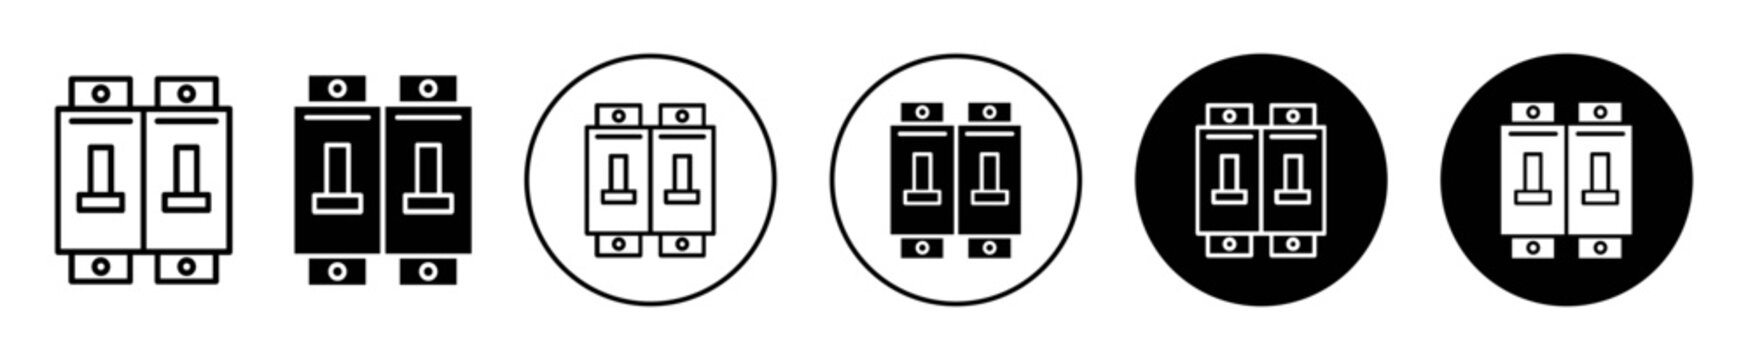 Circuit breaker icon set. mcb safety switchboard panel vector symbol in black filled and outlined style.